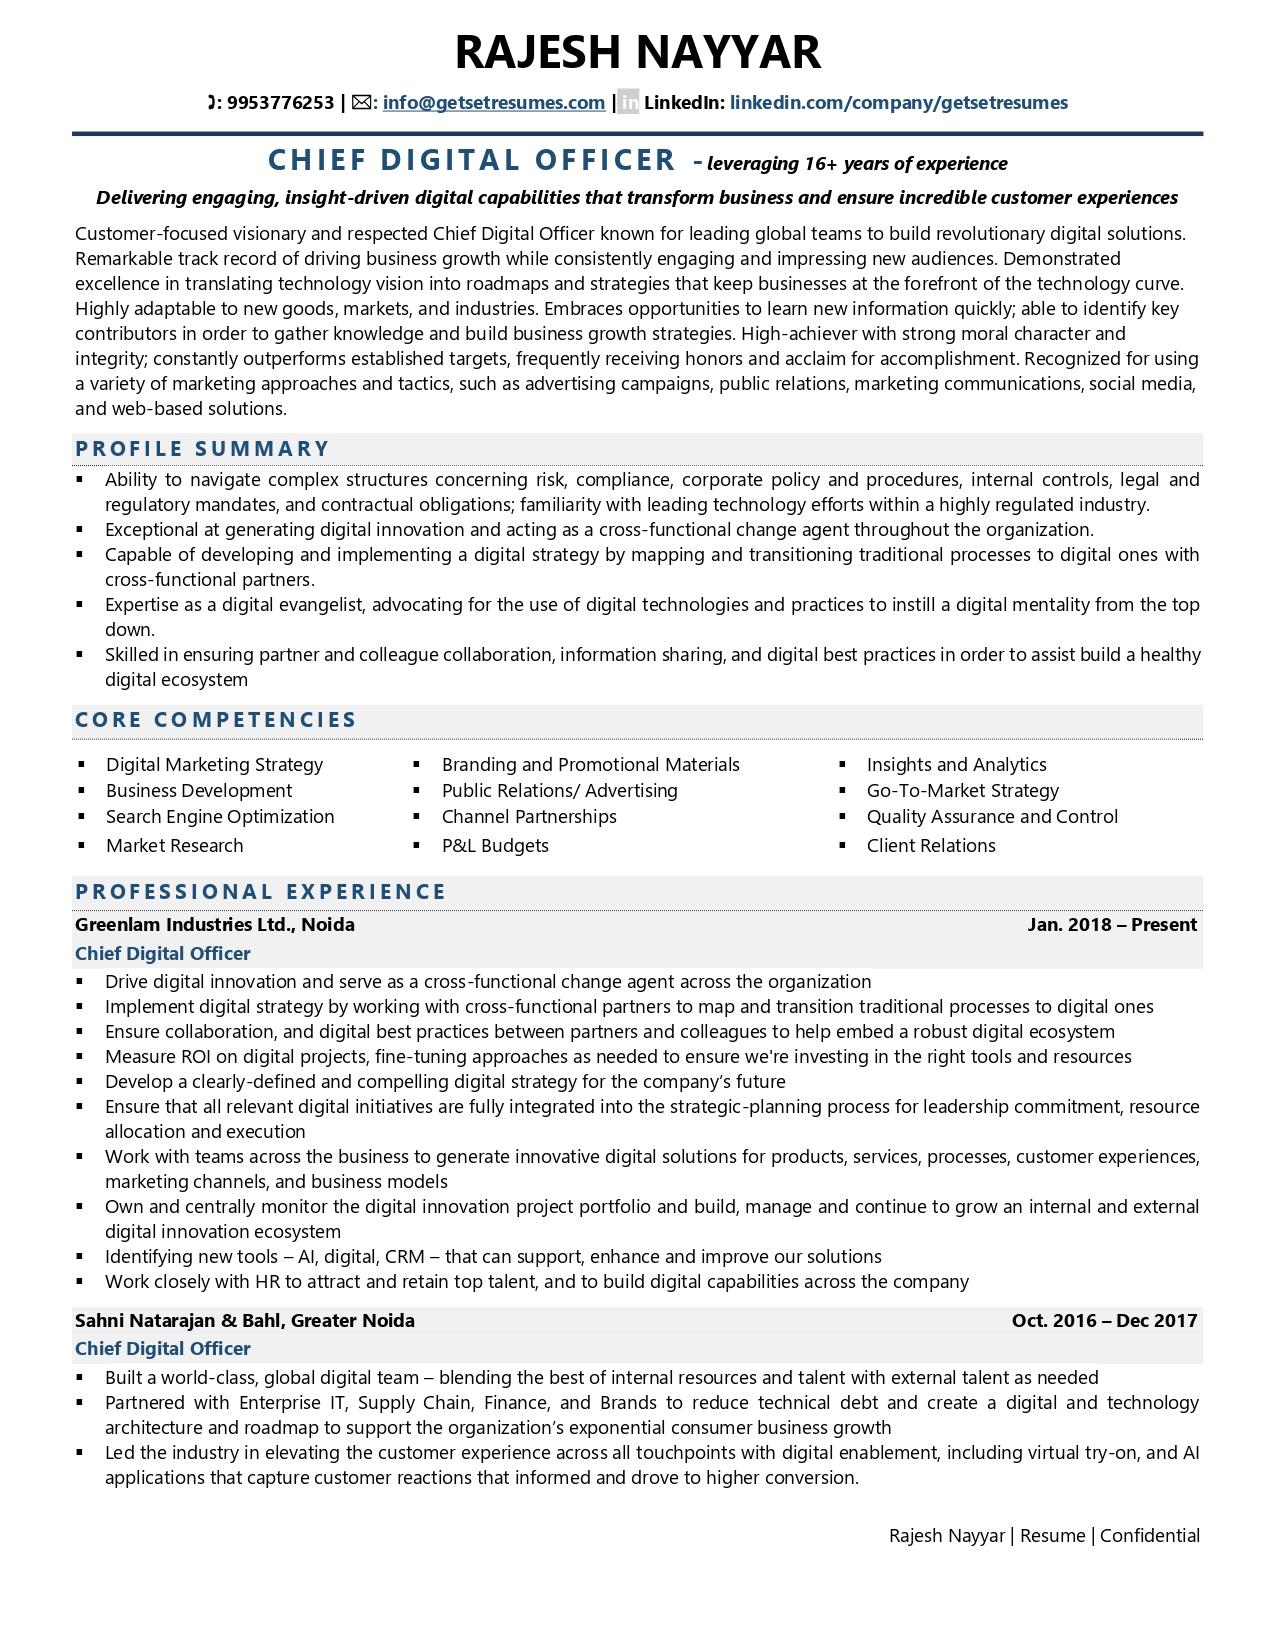 Chief Digital Officer - Resume Example & Template